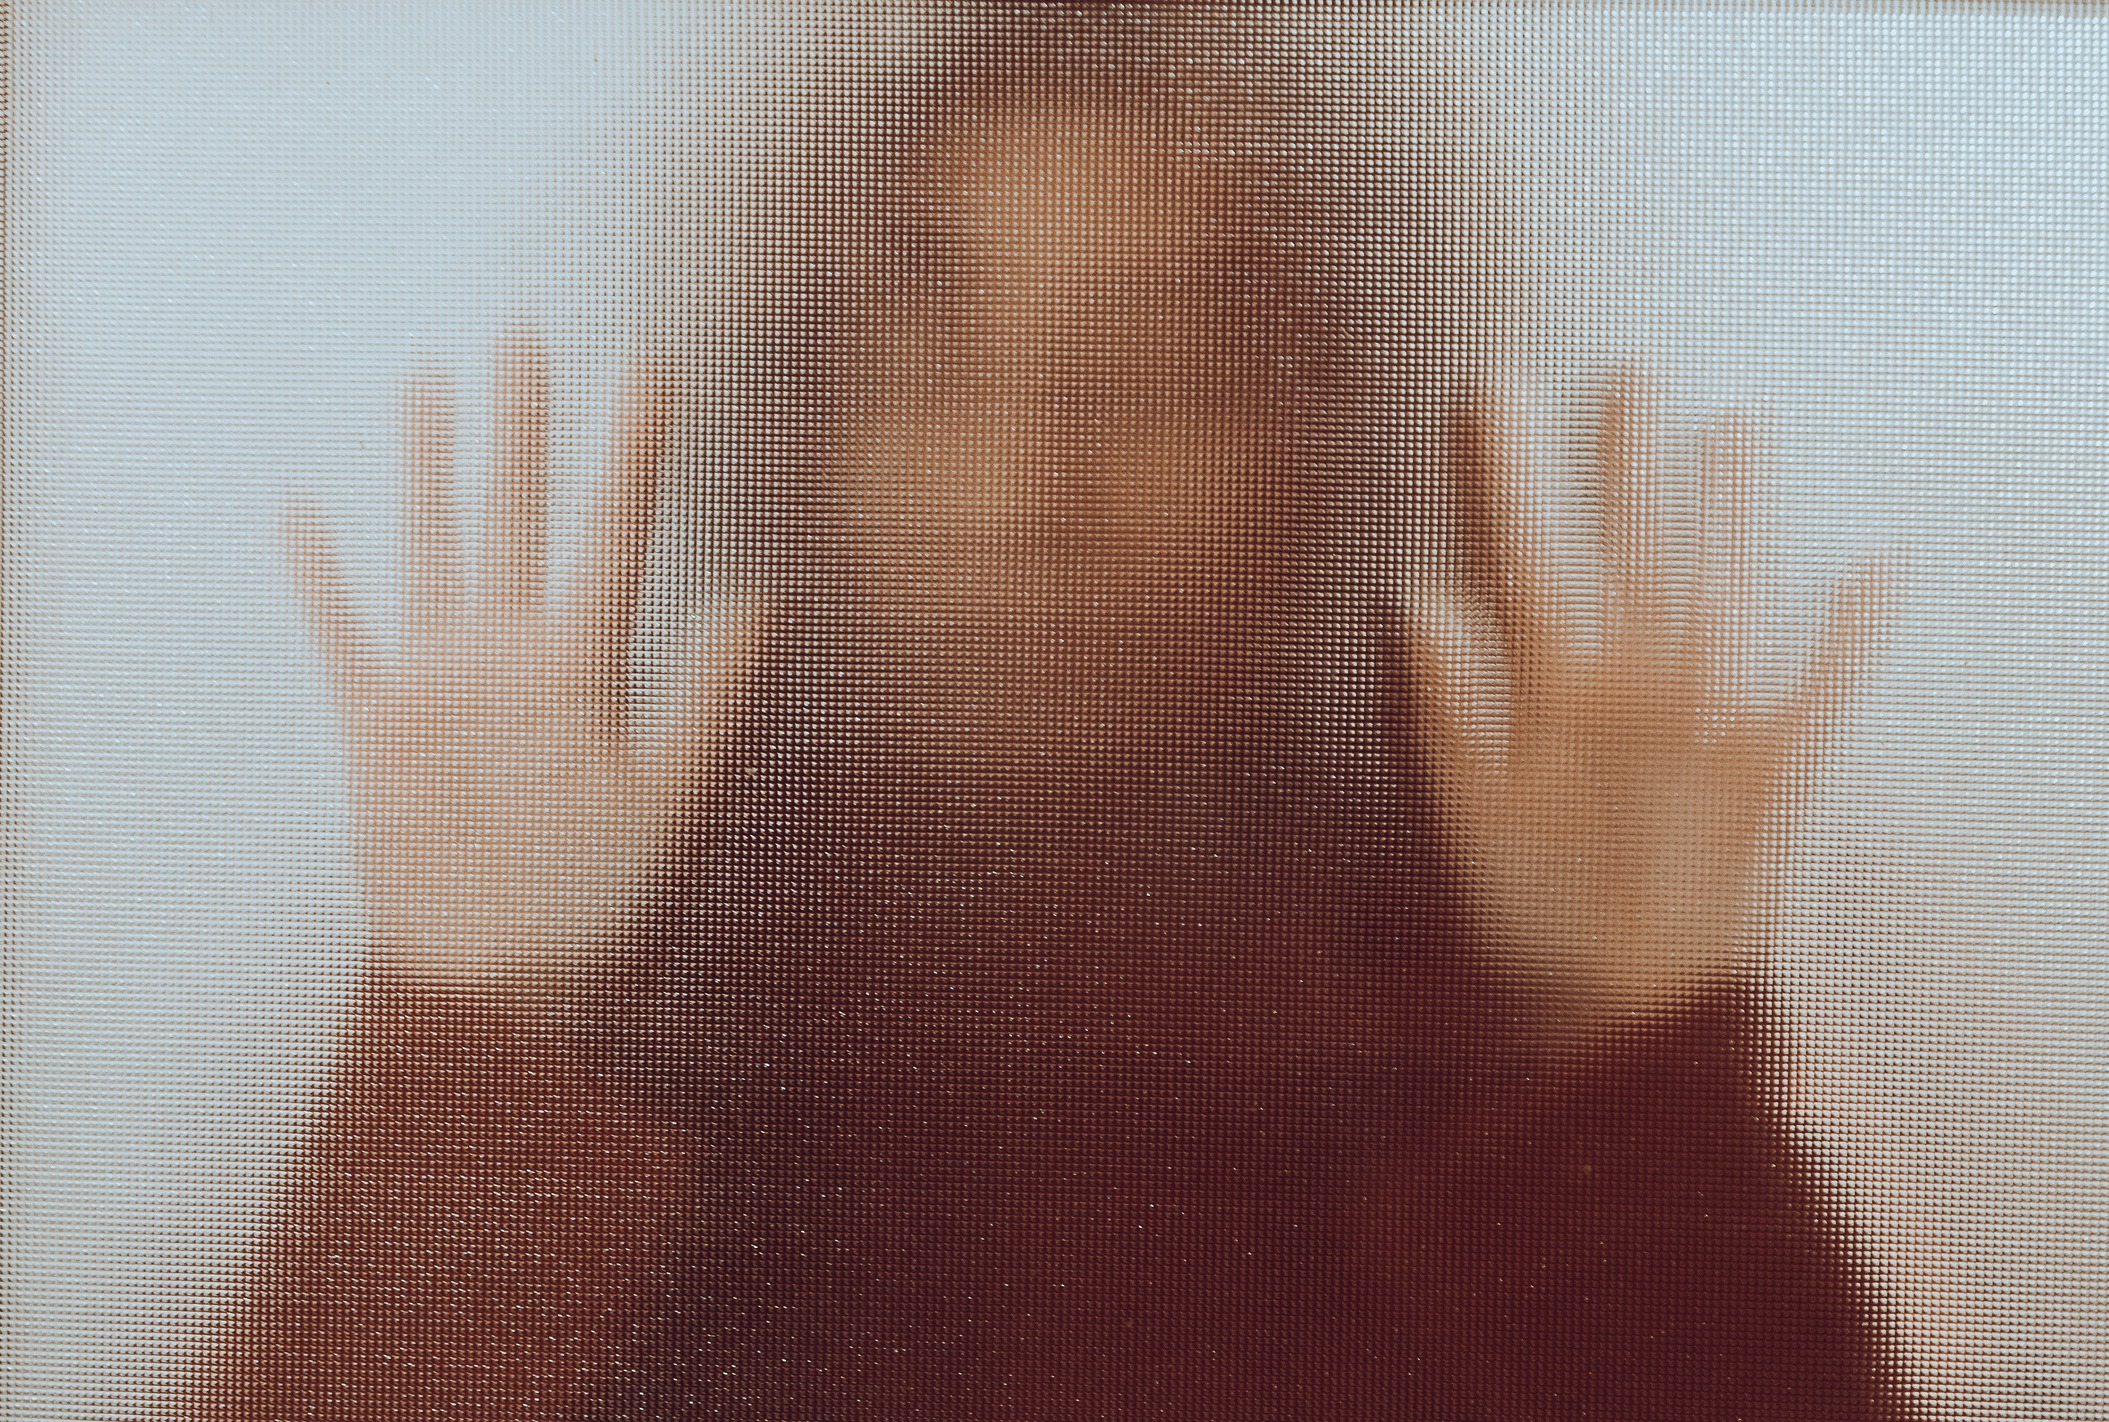 Blurred Image of Women with hands against glass